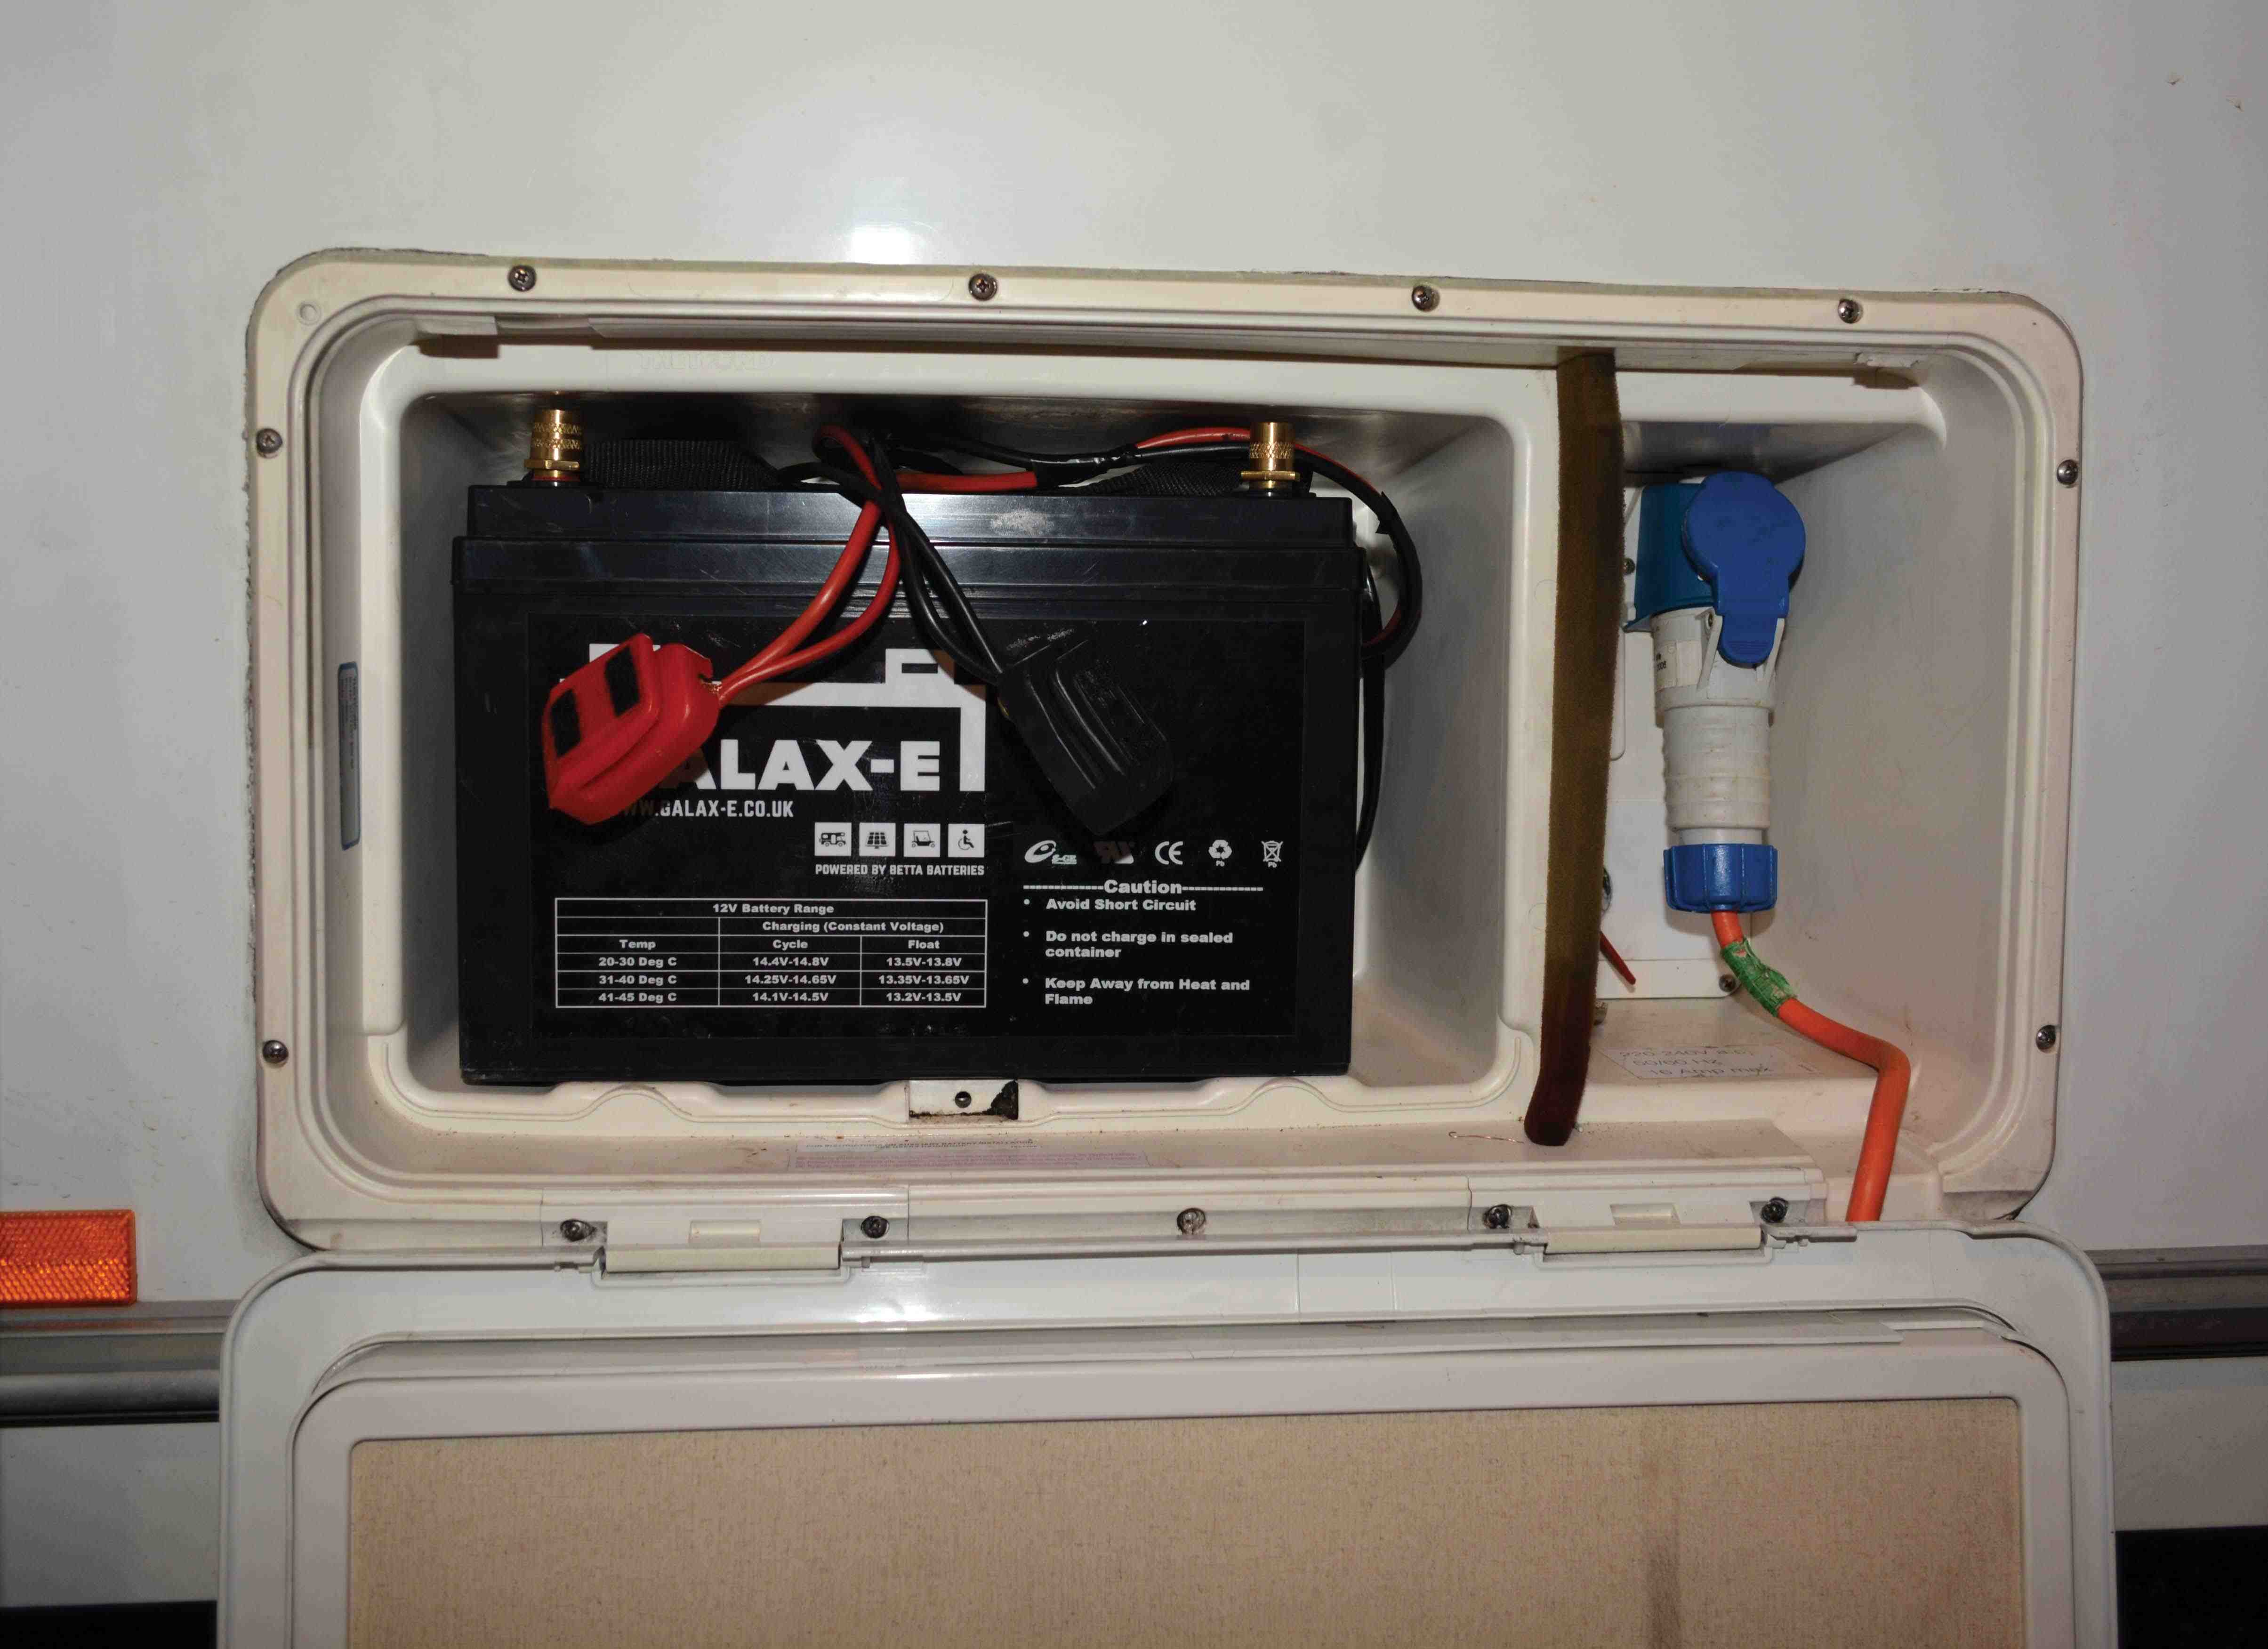 The best way to store a leisure battery is to disconnect it or isolate it from all 12V equipment using the unit’s isolation switch and keep it fully charged